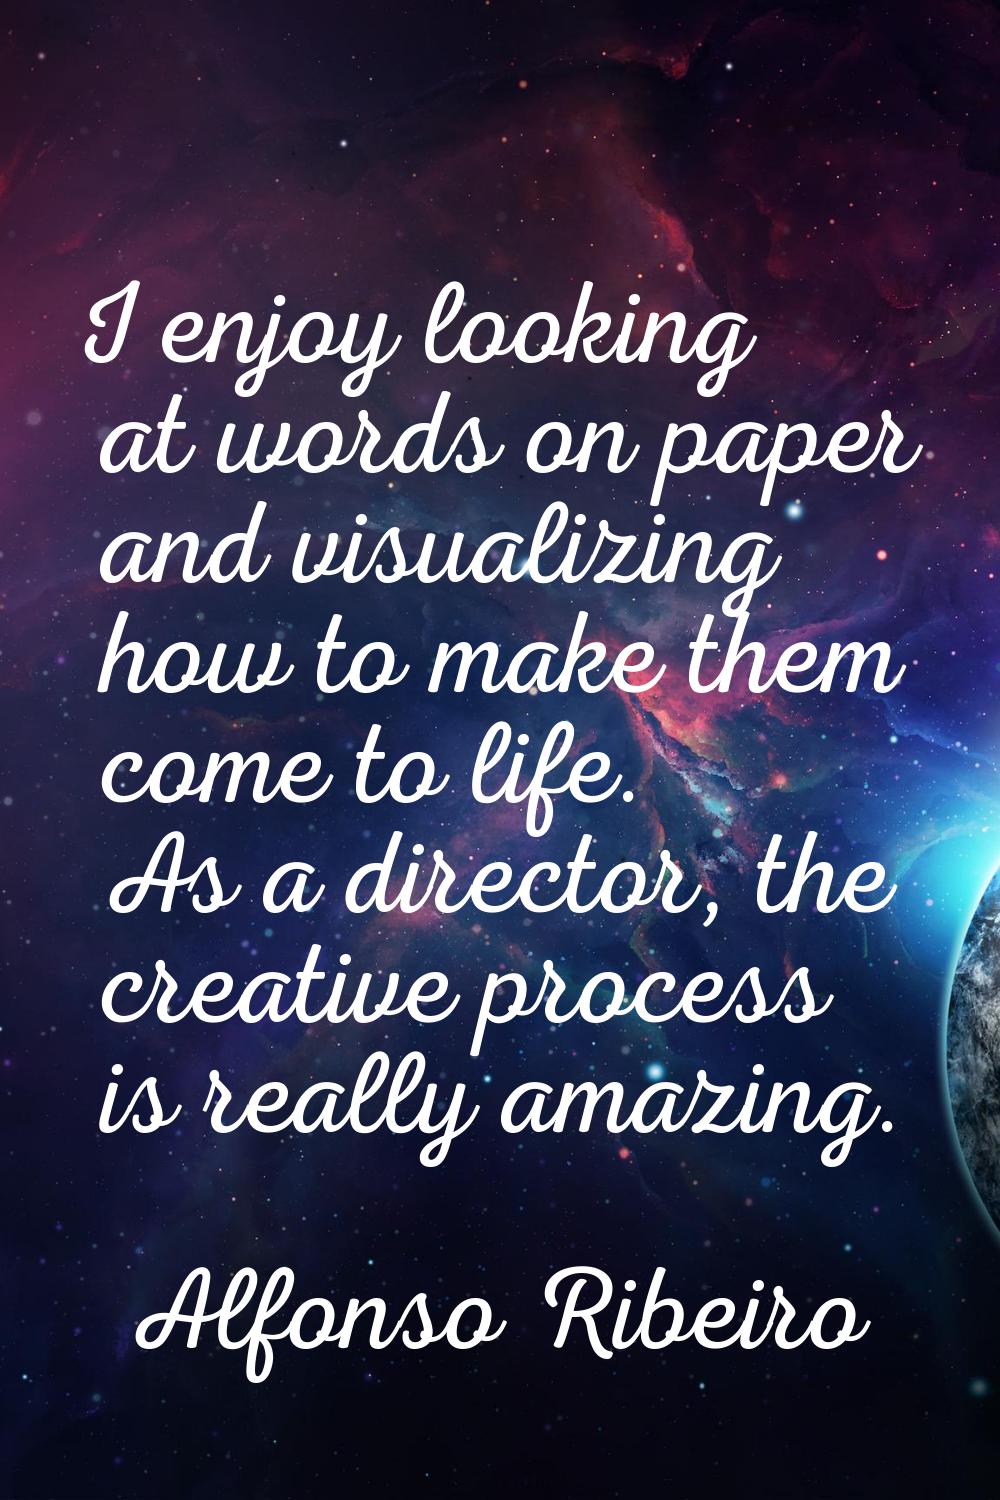 I enjoy looking at words on paper and visualizing how to make them come to life. As a director, the